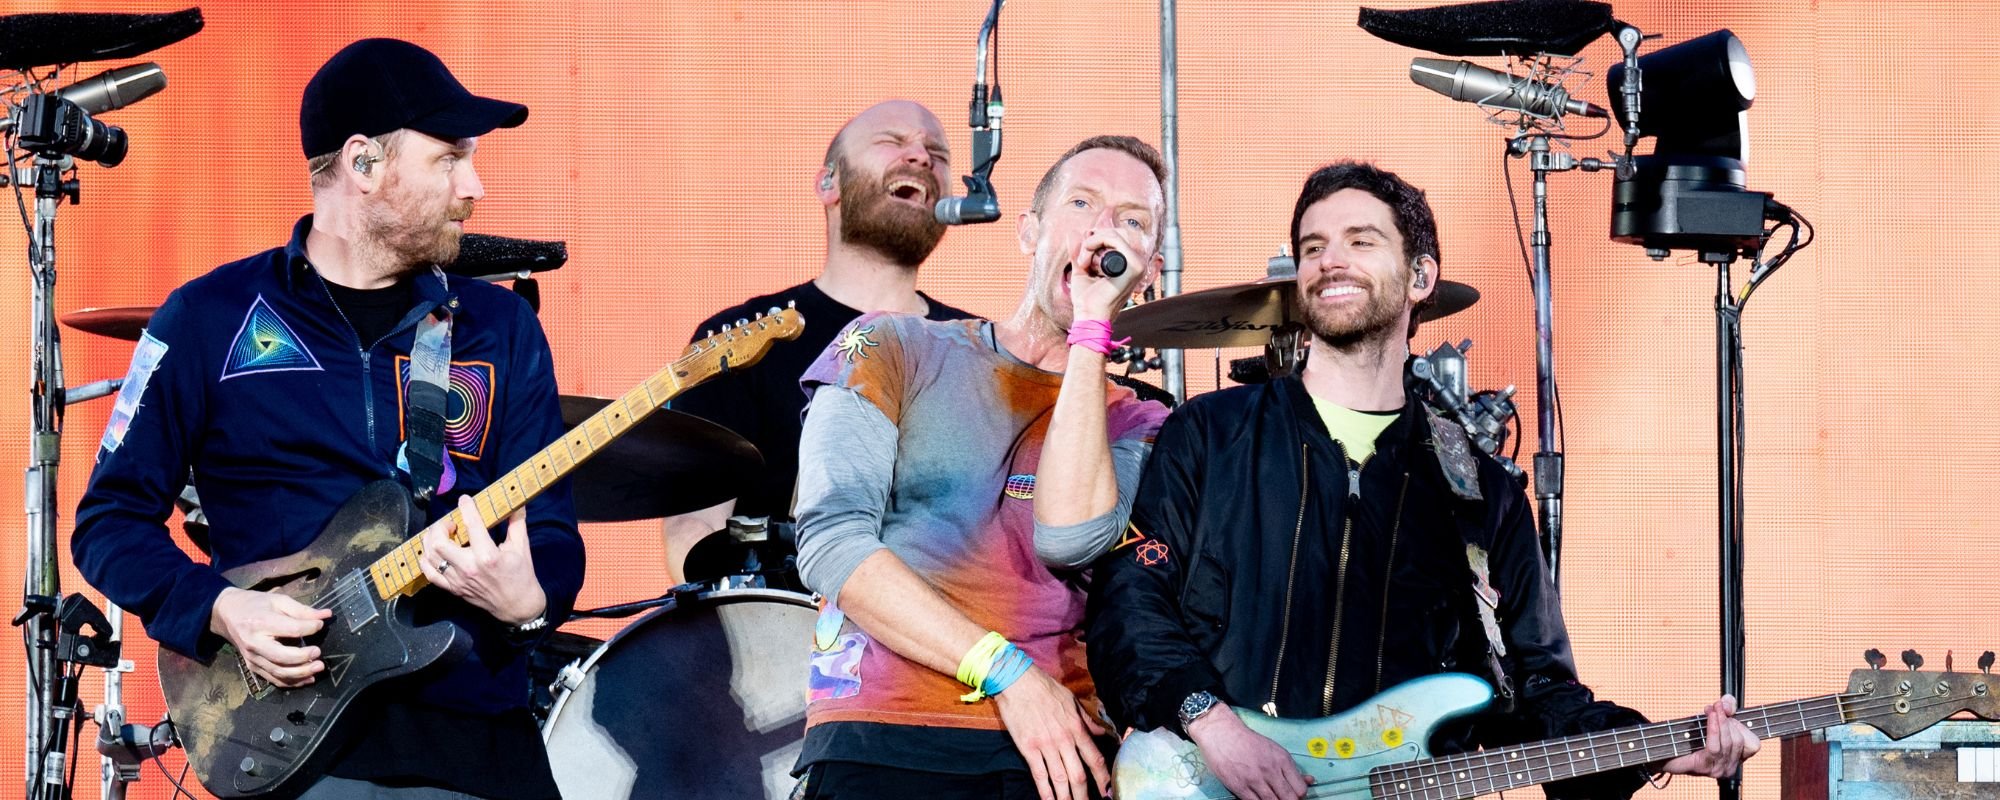 The Starry Meaning Behind "Yellow" by Coldplay